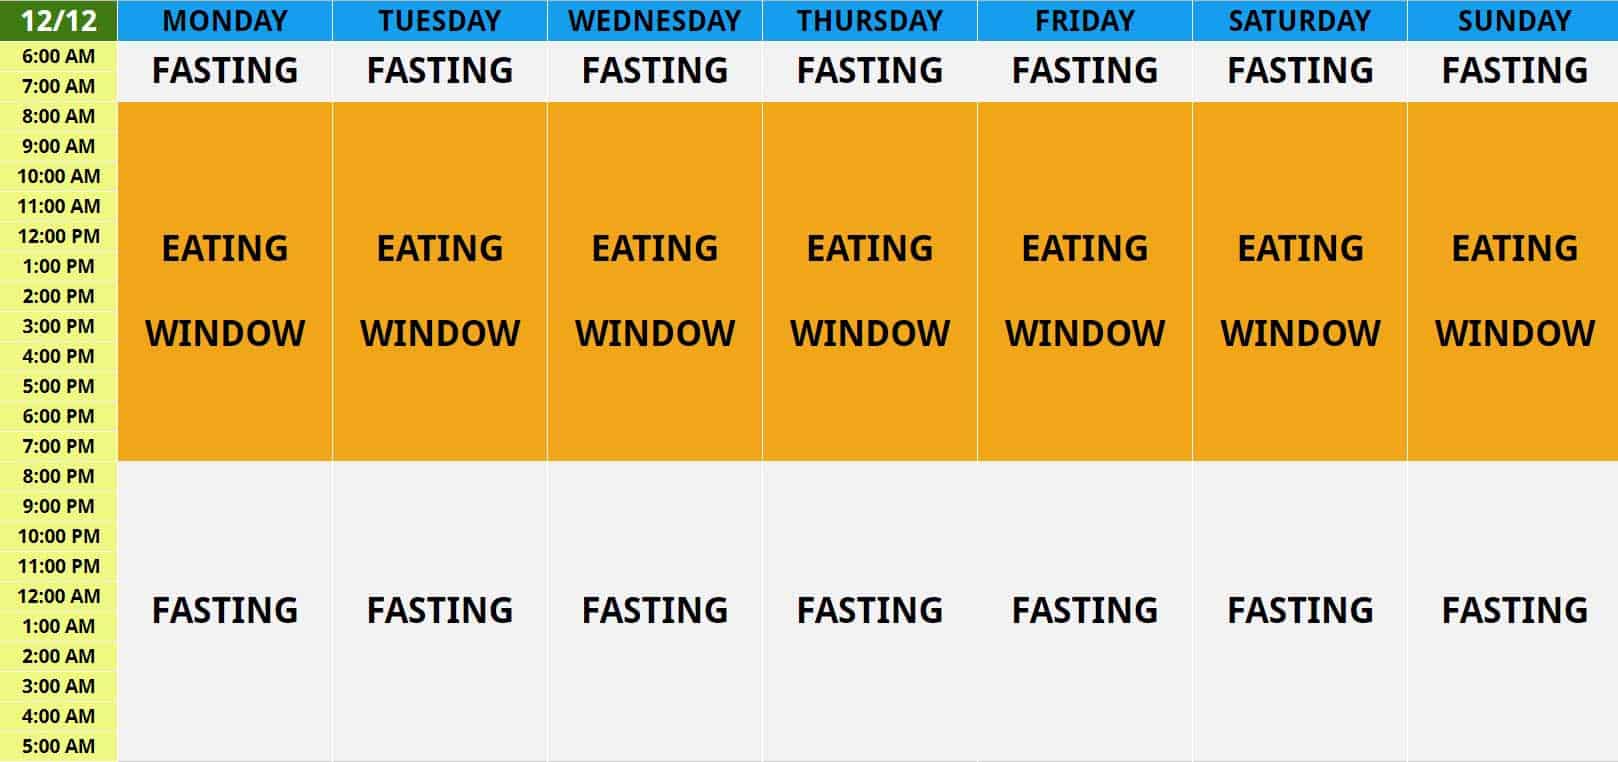 intermittent fasting protocols, types of intermittent fasting protocols, 12/12